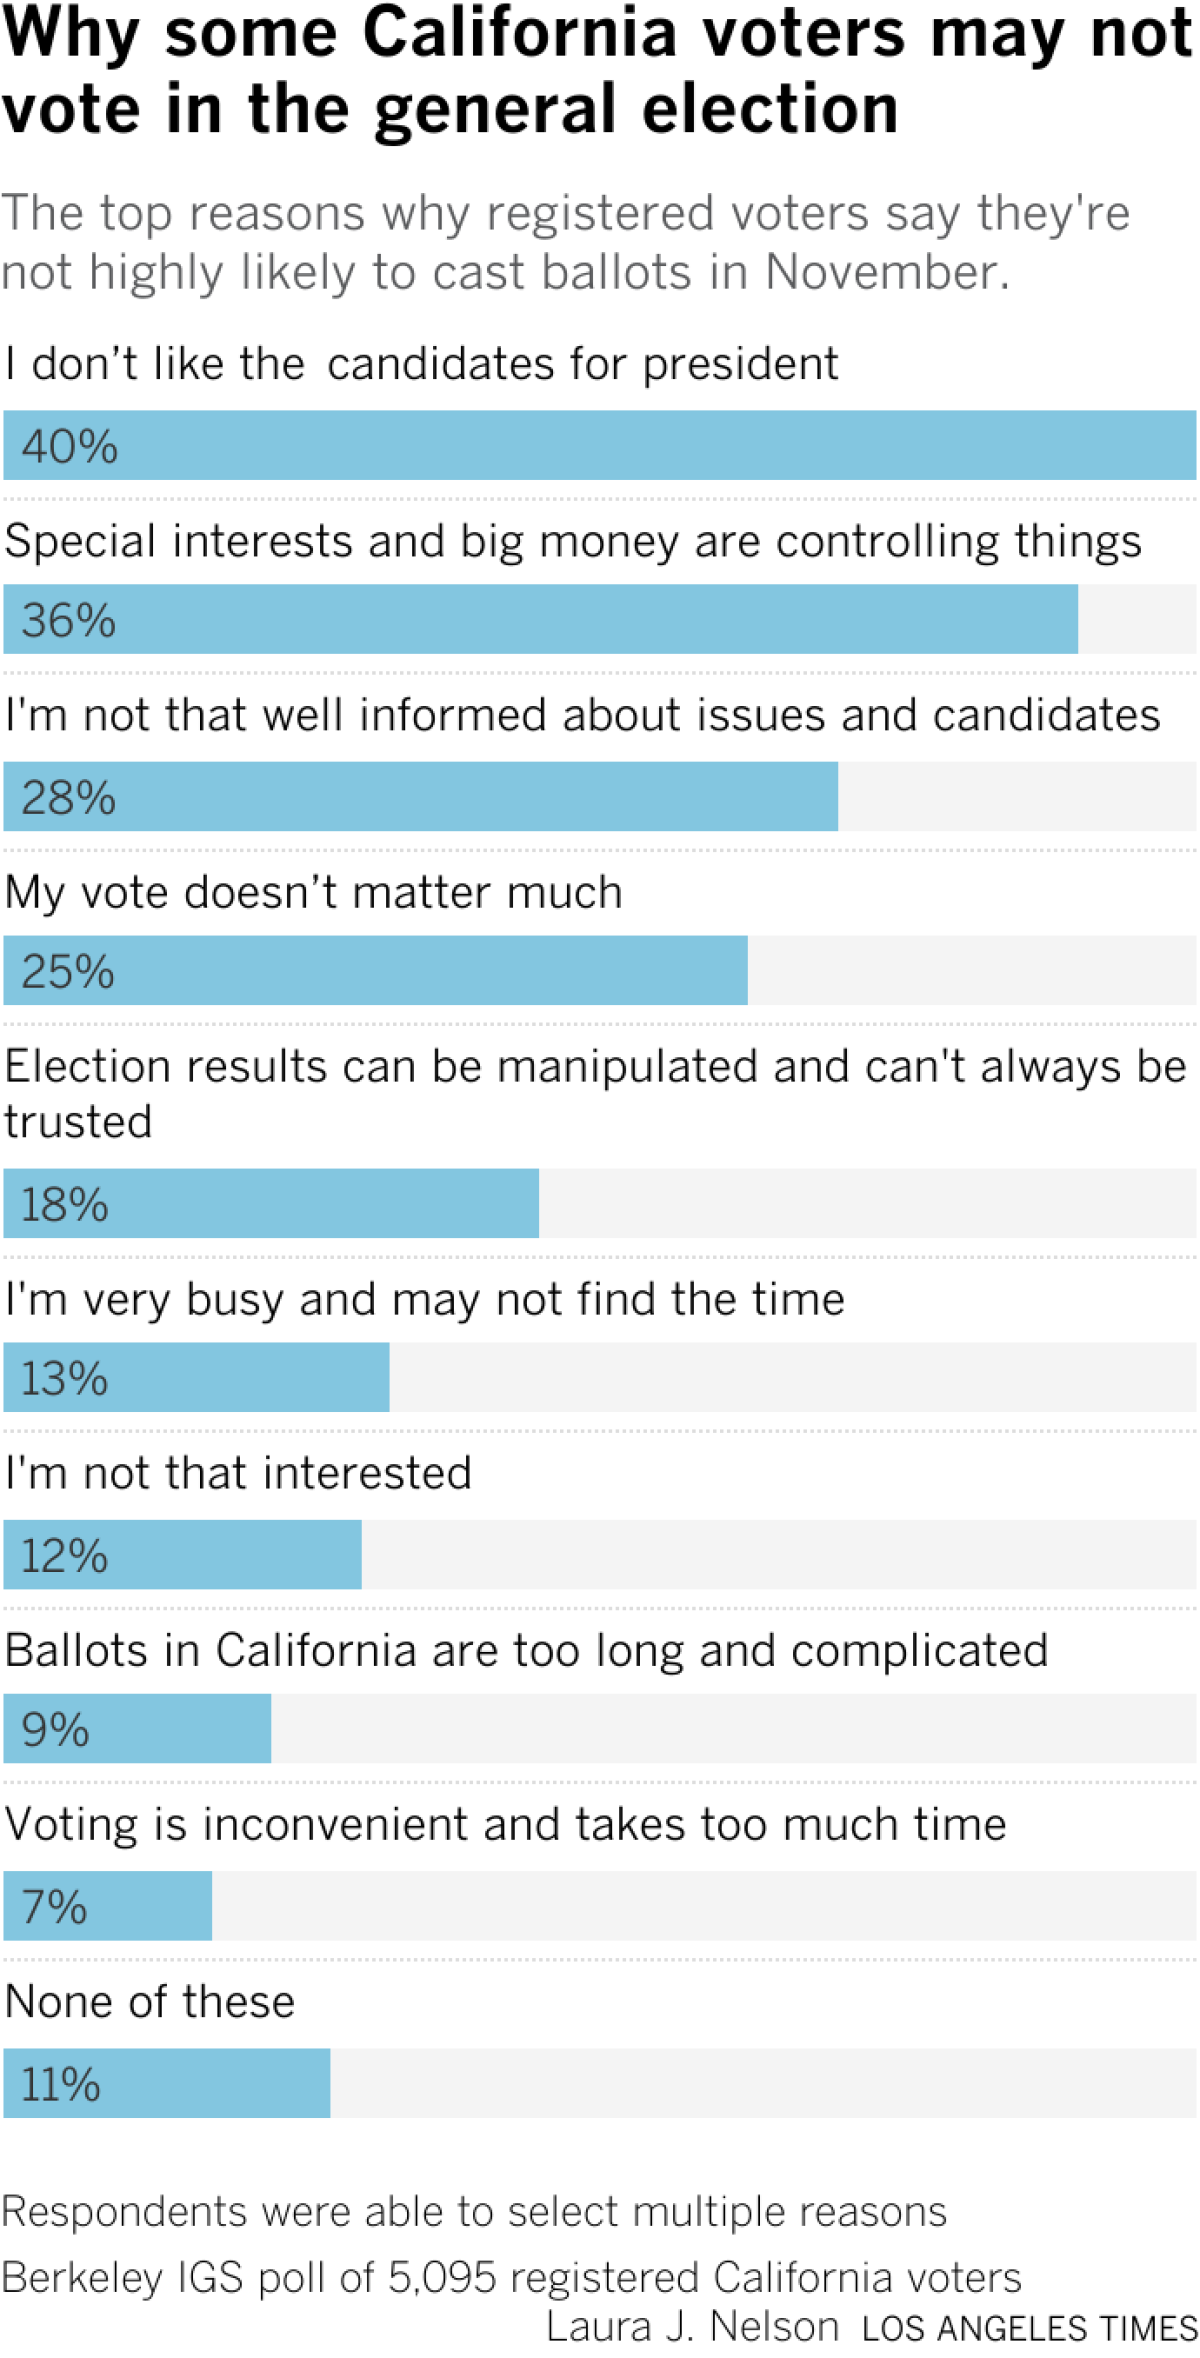 Top reasons registered voters say they're unlikely to vote in November.